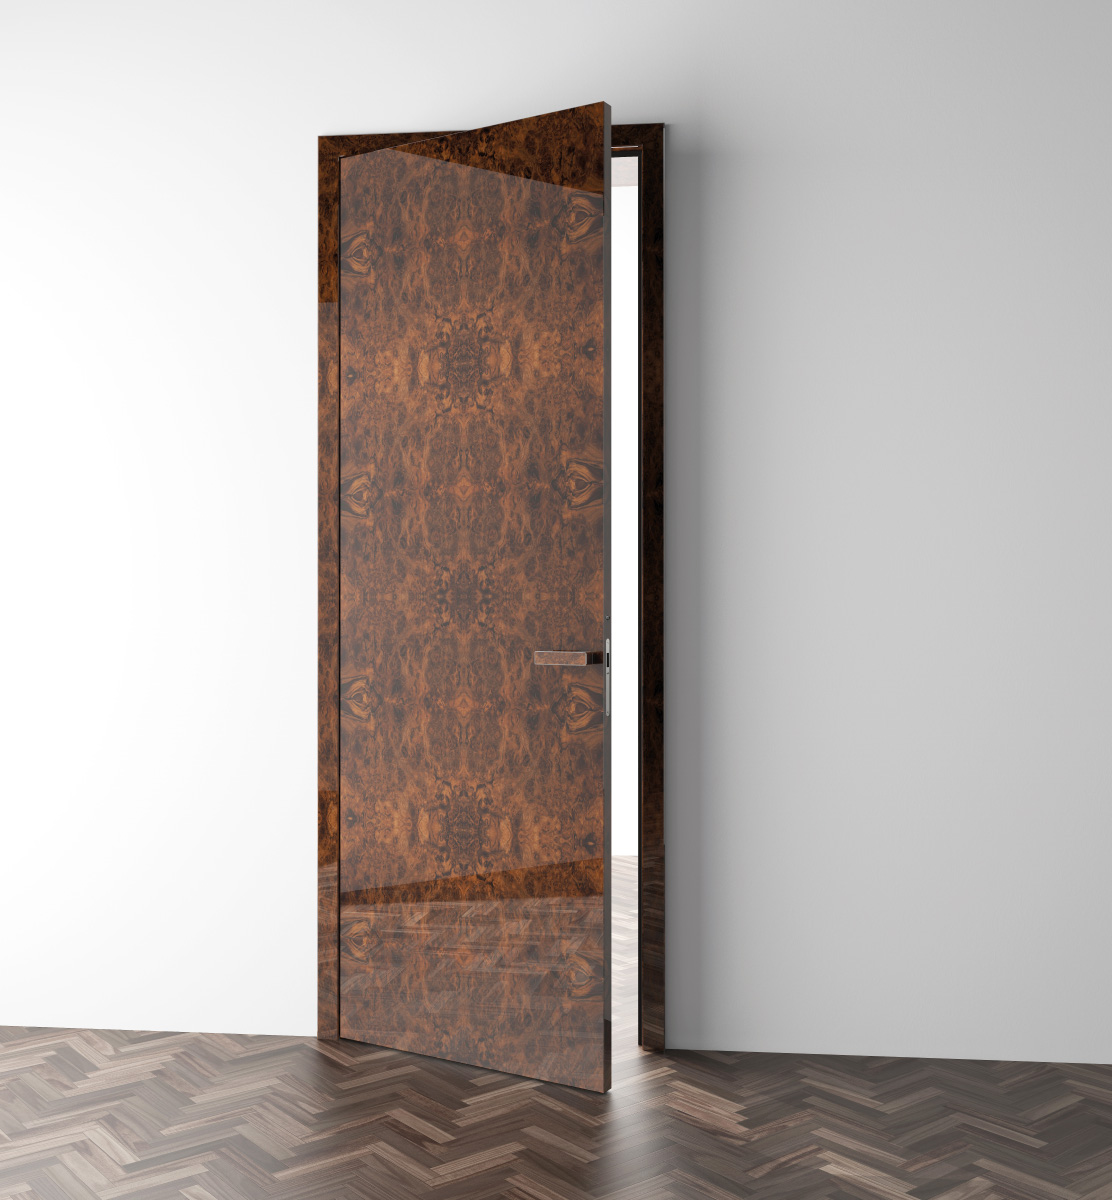 PARIS luxury doors are absolutely exceptional thanks to the material - walnut root veneer.